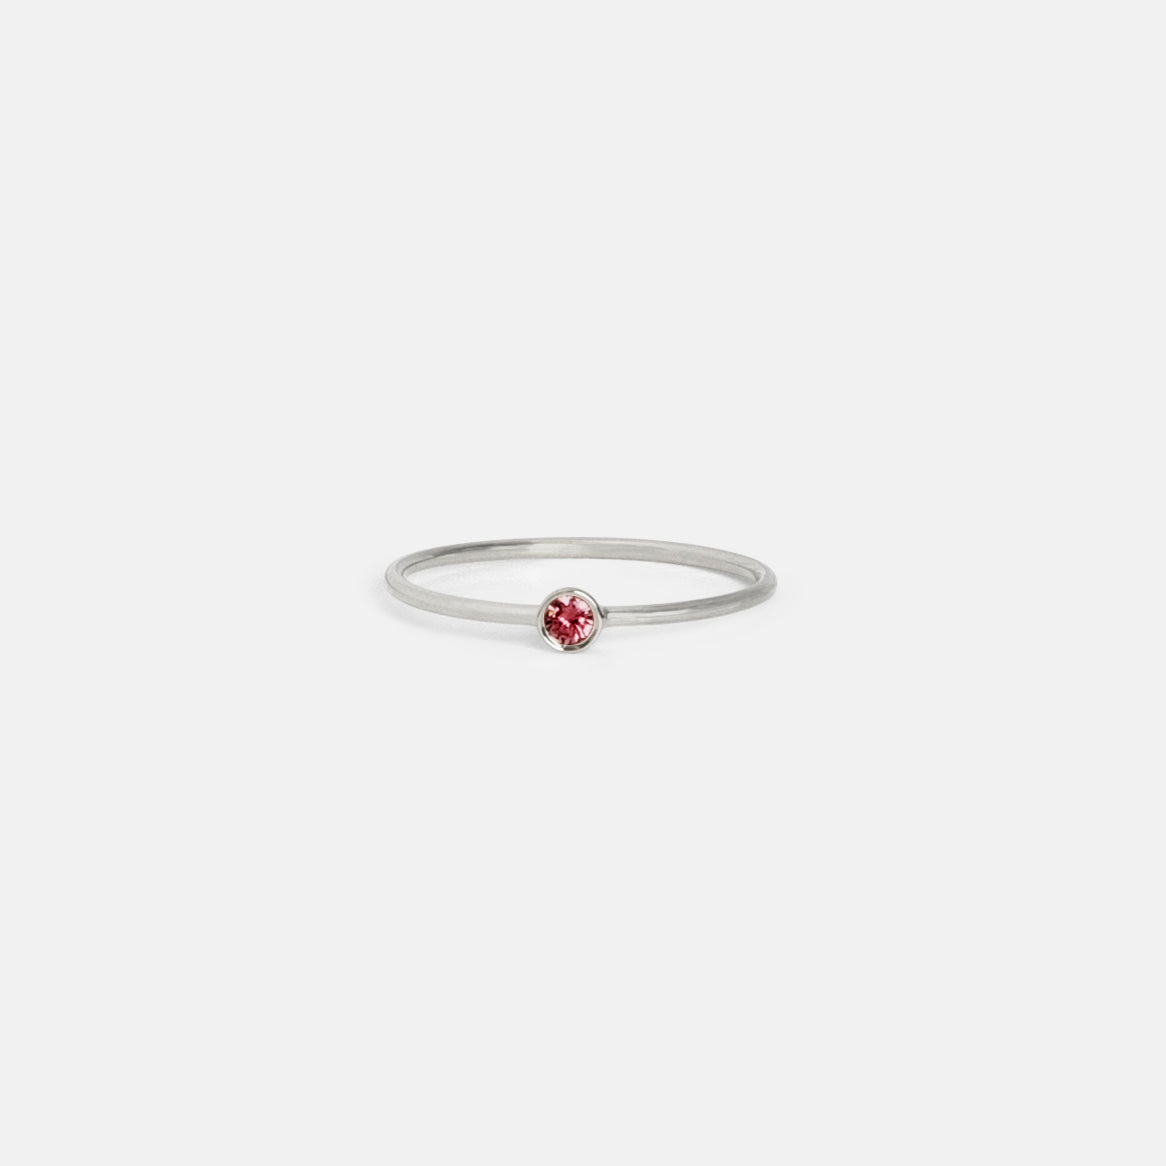 Large Kaya Ring in 14k White Gold set with Ruby by SHW Fine Jewelry